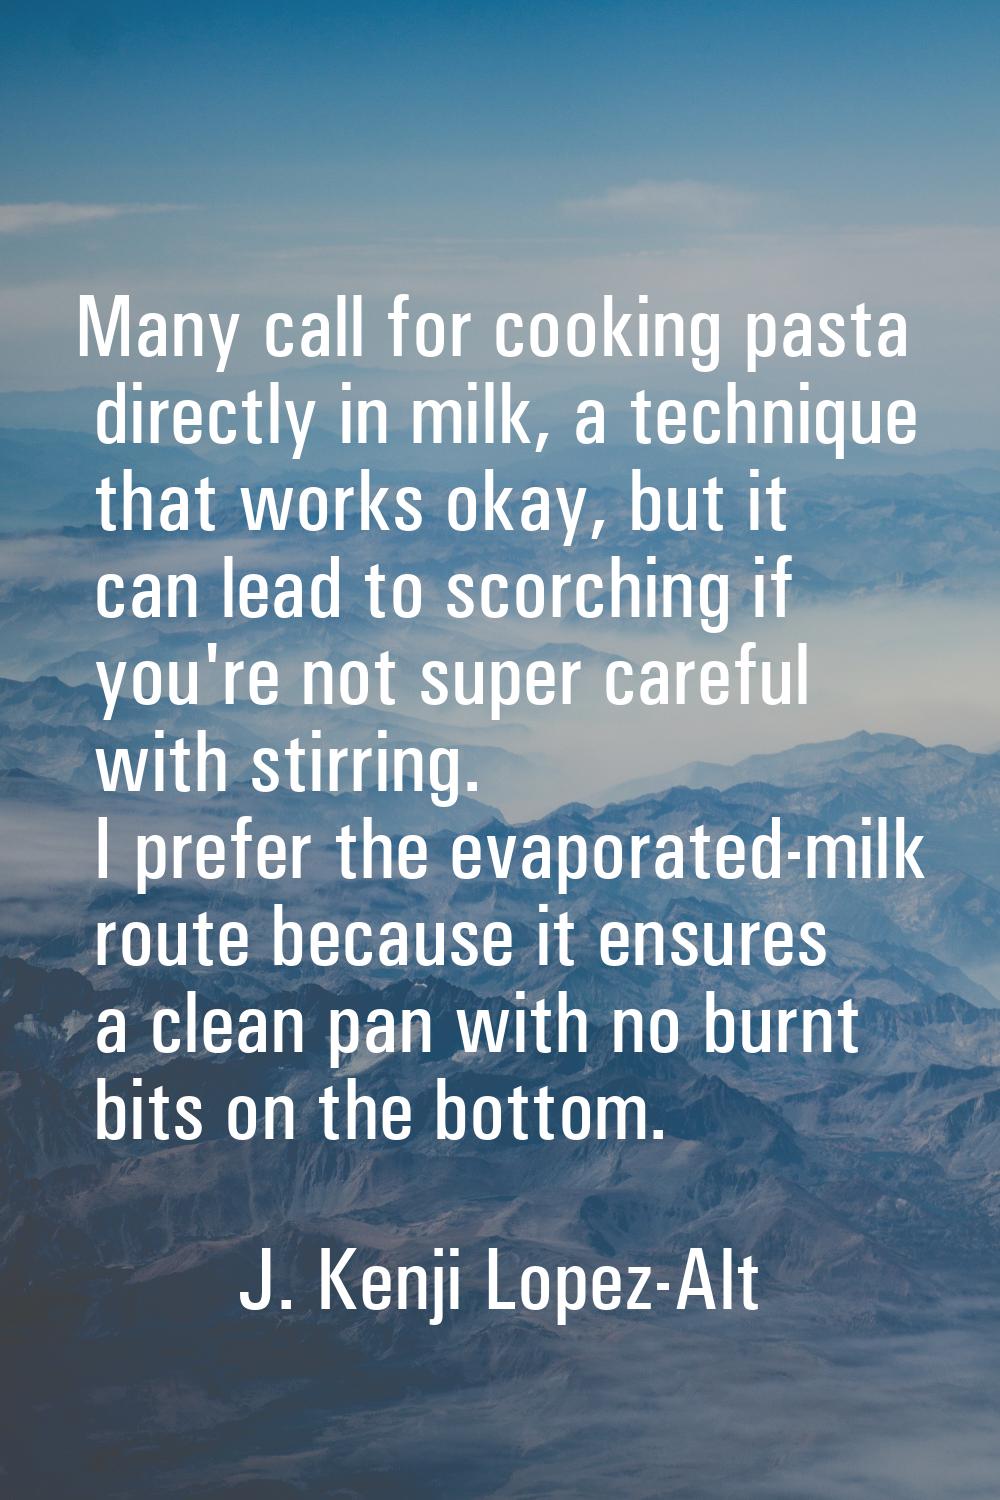 Many call for cooking pasta directly in milk, a technique that works okay, but it can lead to scorc